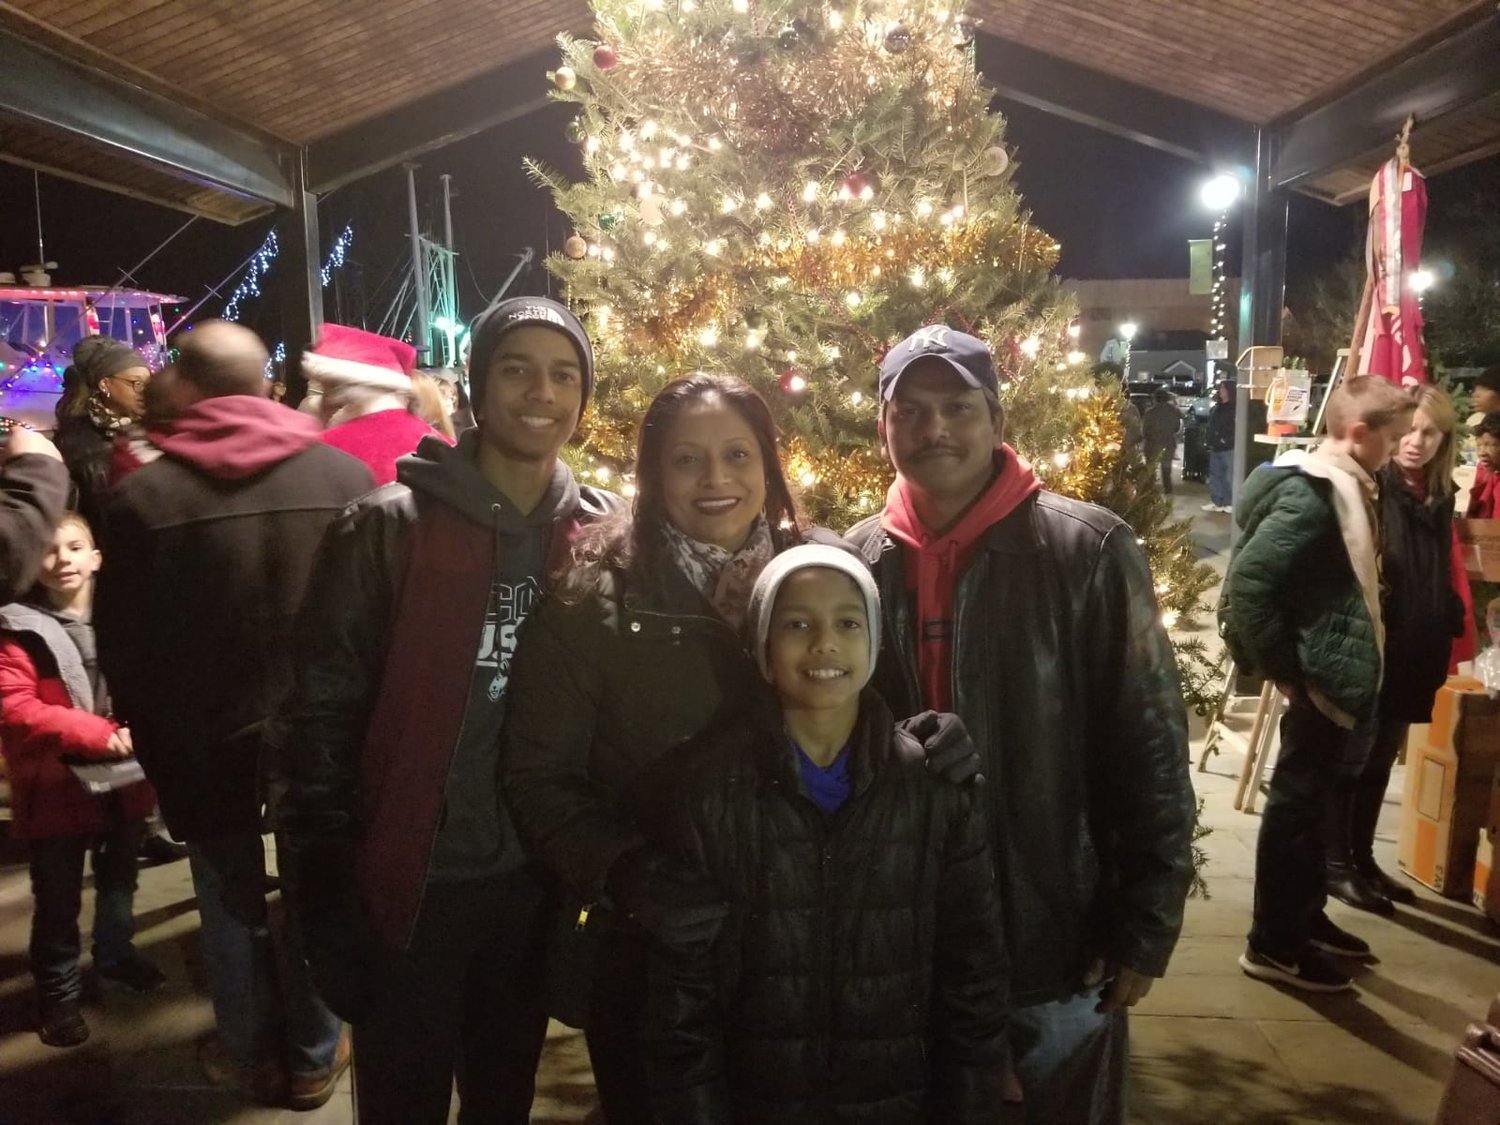 The Budhu family, Justin, left, Joanna, Jayden and John, right during the holiday seasons at the Esplanade on Woodcleft Avenue in Freeport.